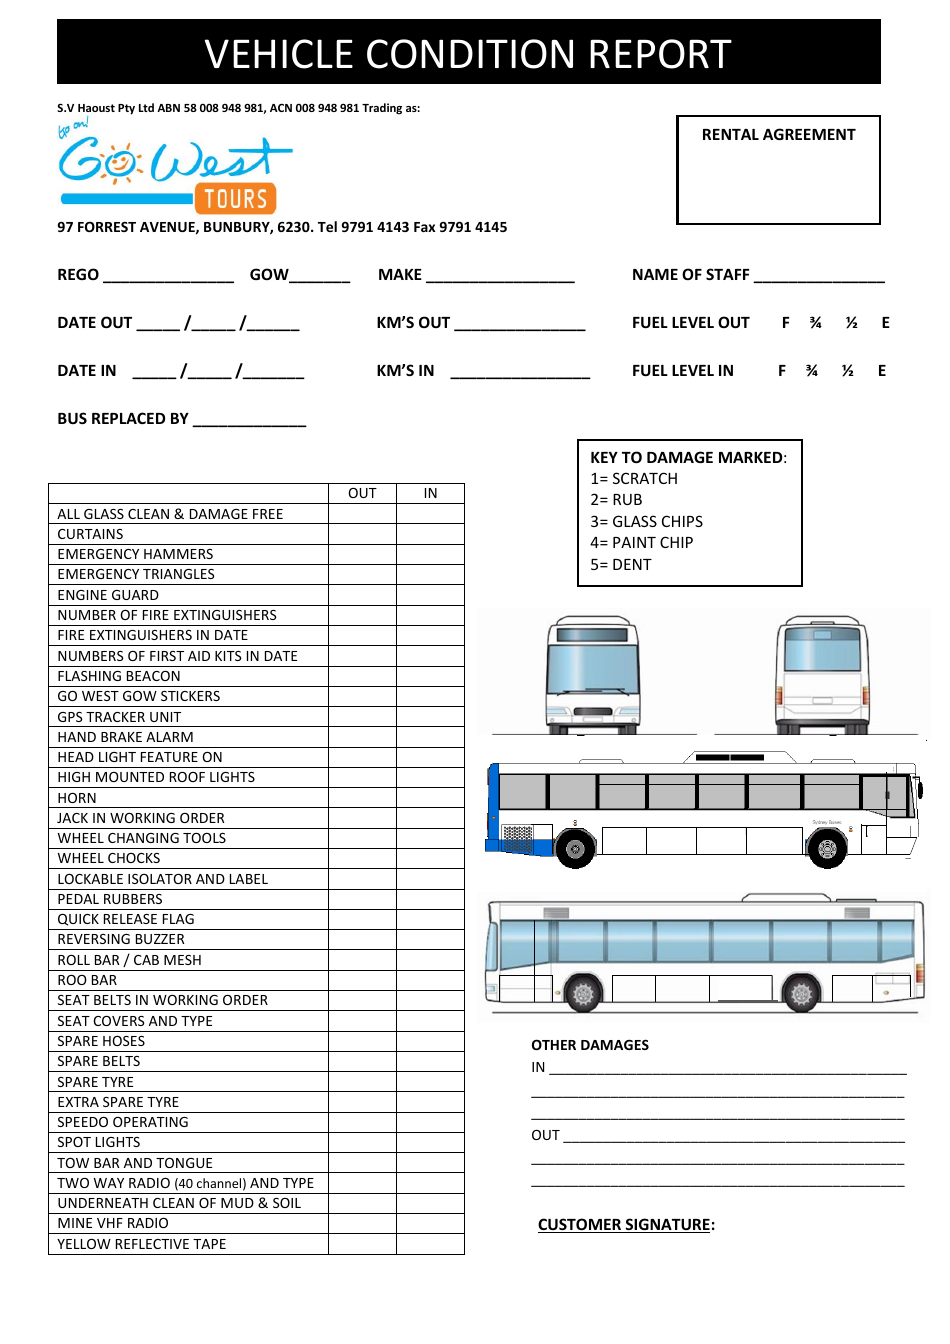 Vehicle Condition Report Template - Cowest Tours Download Throughout Truck Condition Report Template